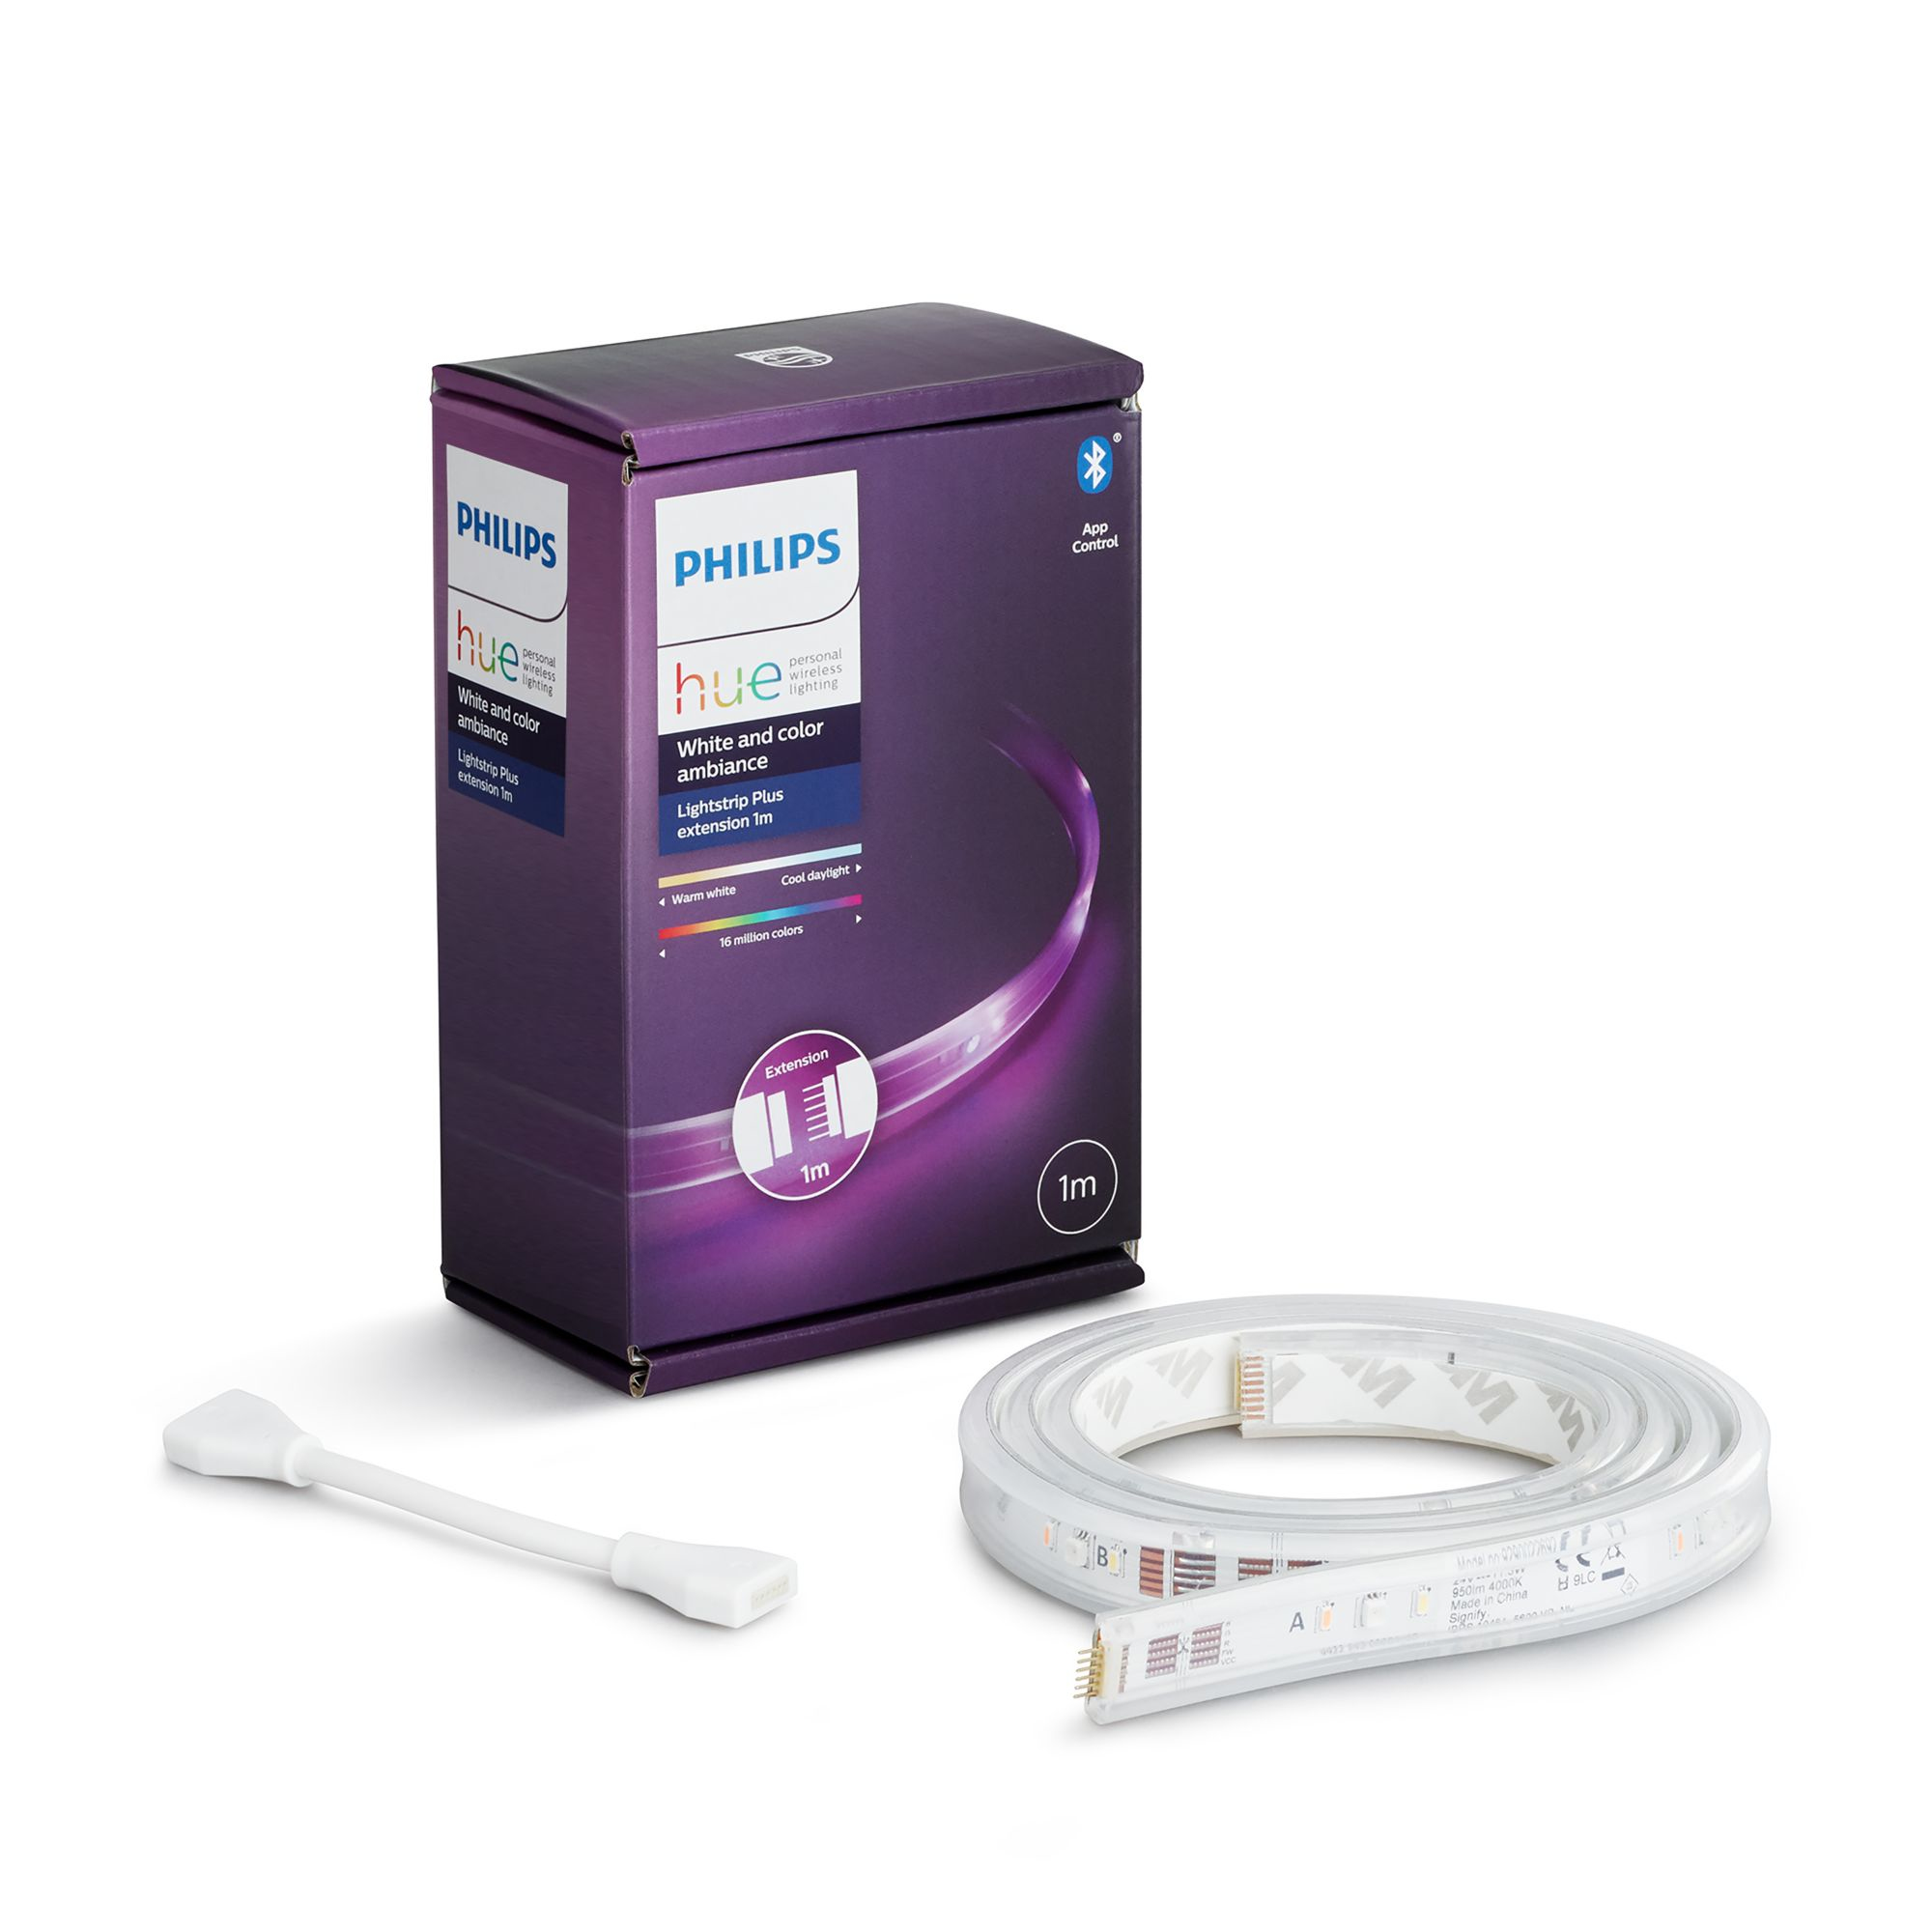 Philips Hue Lightstrip Plus Extension 1m White & Color Ambience